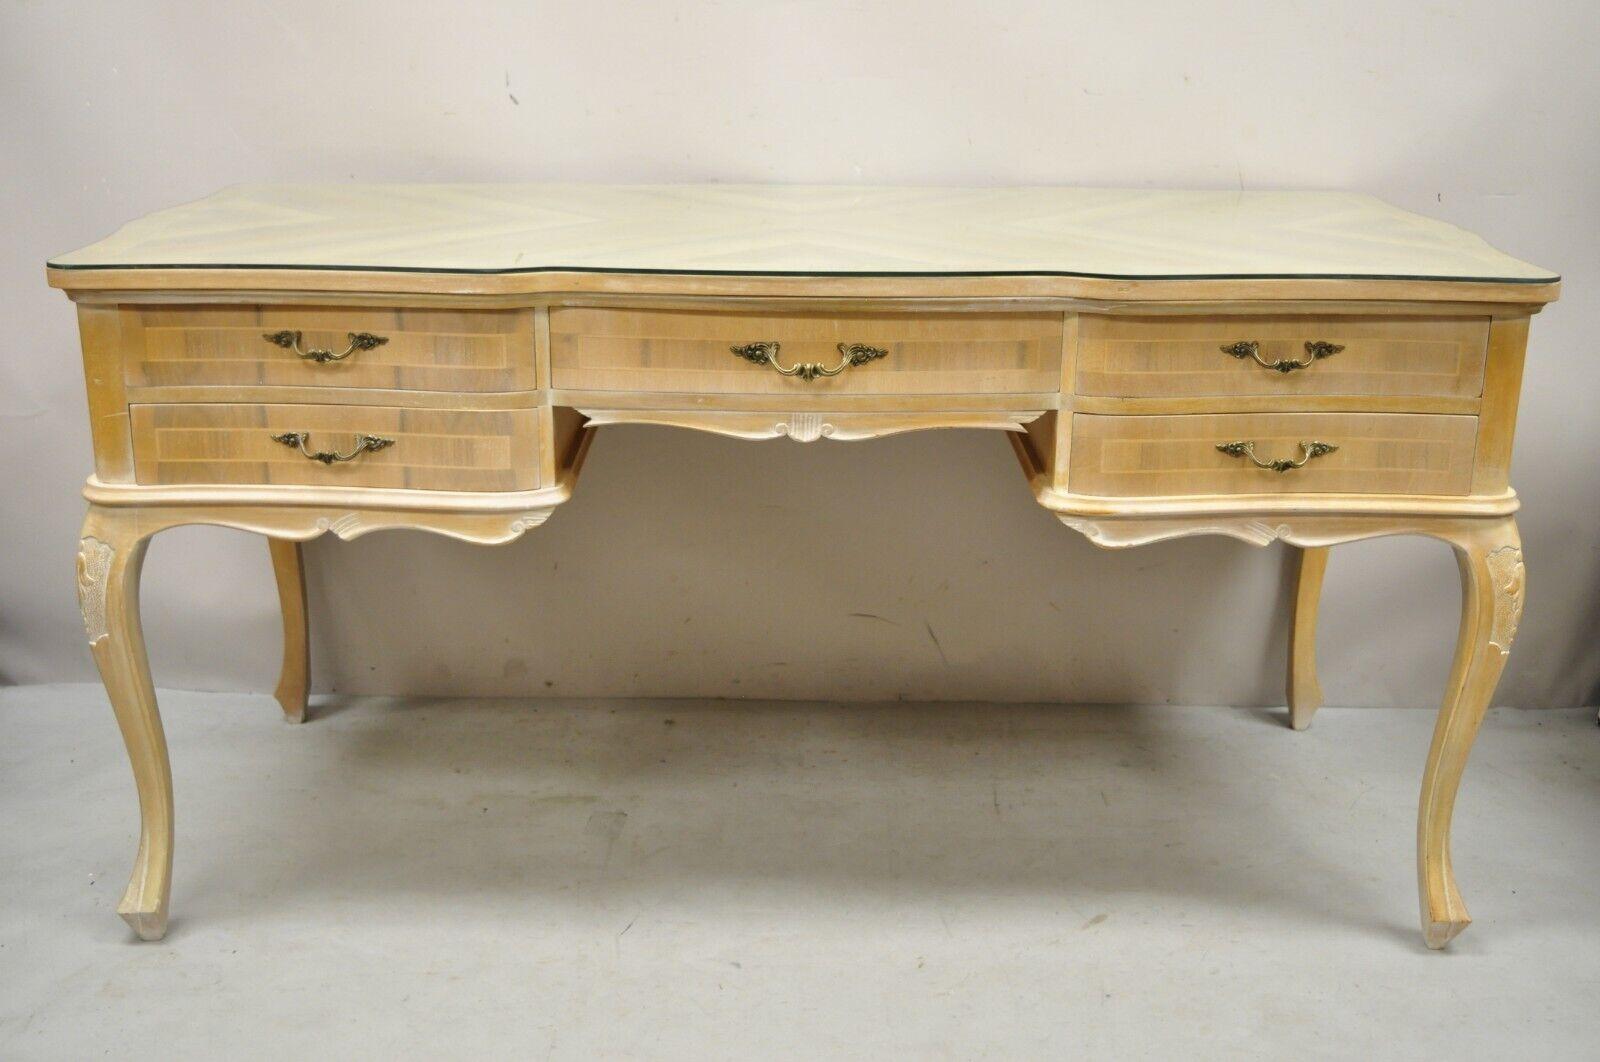 Vintage Italian Provincial French Country Sunburst Inlay Executive writing desk. Item features a sunburst top, pencil inlay throughout, white washed distressed finish, 5 drawers, finished back, cabriole legs, quality Italian craftsmanship, great